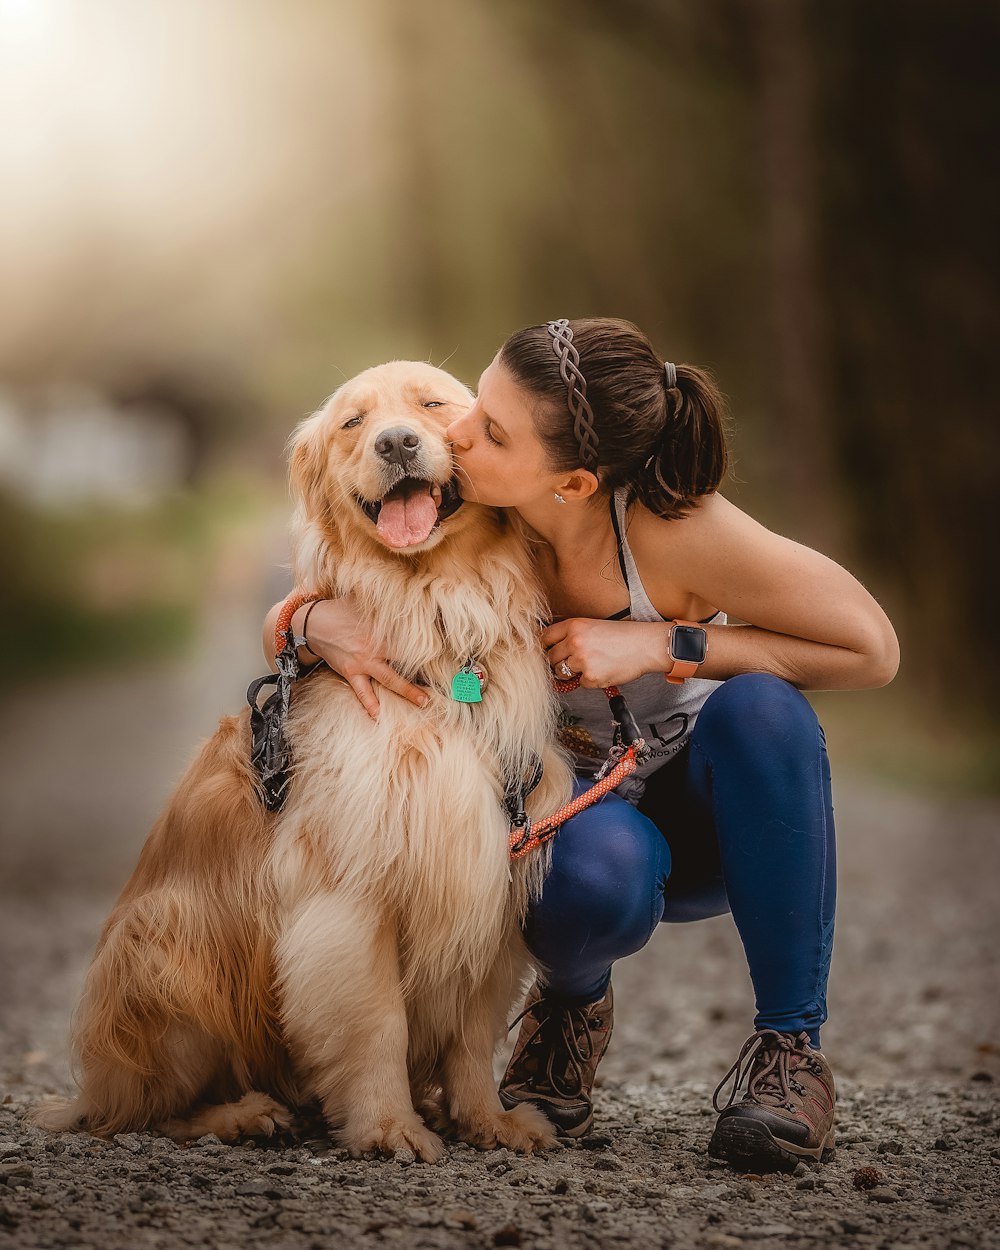 750+ Dog And Girl Pictures | Download Free Images on Unsplash